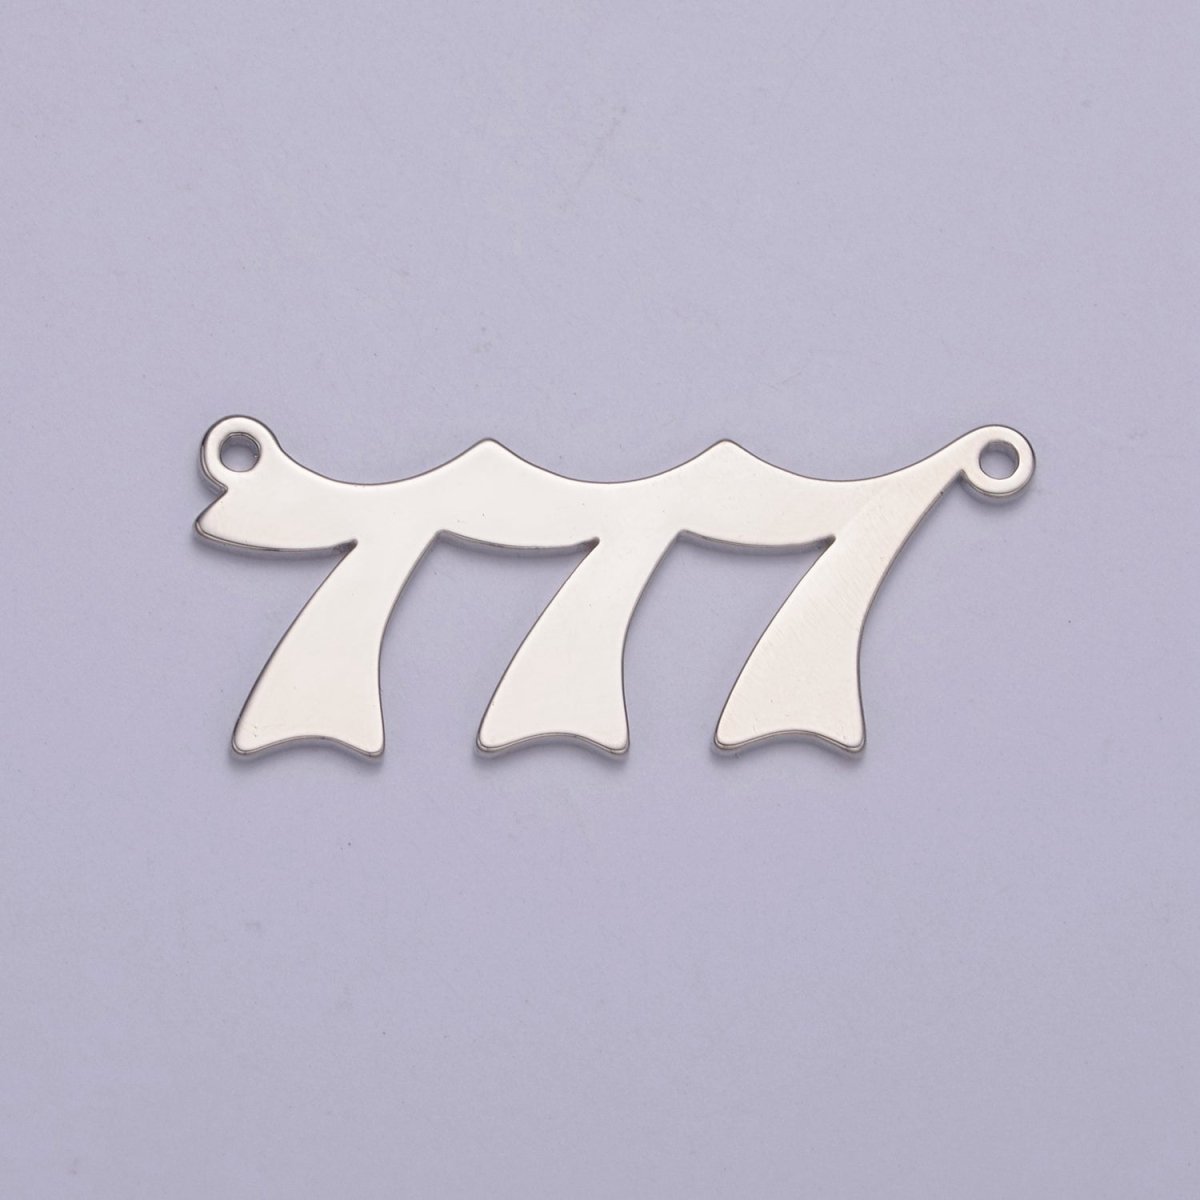 Silver Angel Number Charm Connector Lucky Number for Necklace Bracelet Component F-330 F-341 F-342 F-345 F-369 F-370 F373 F-401 F-411 - DLUXCA